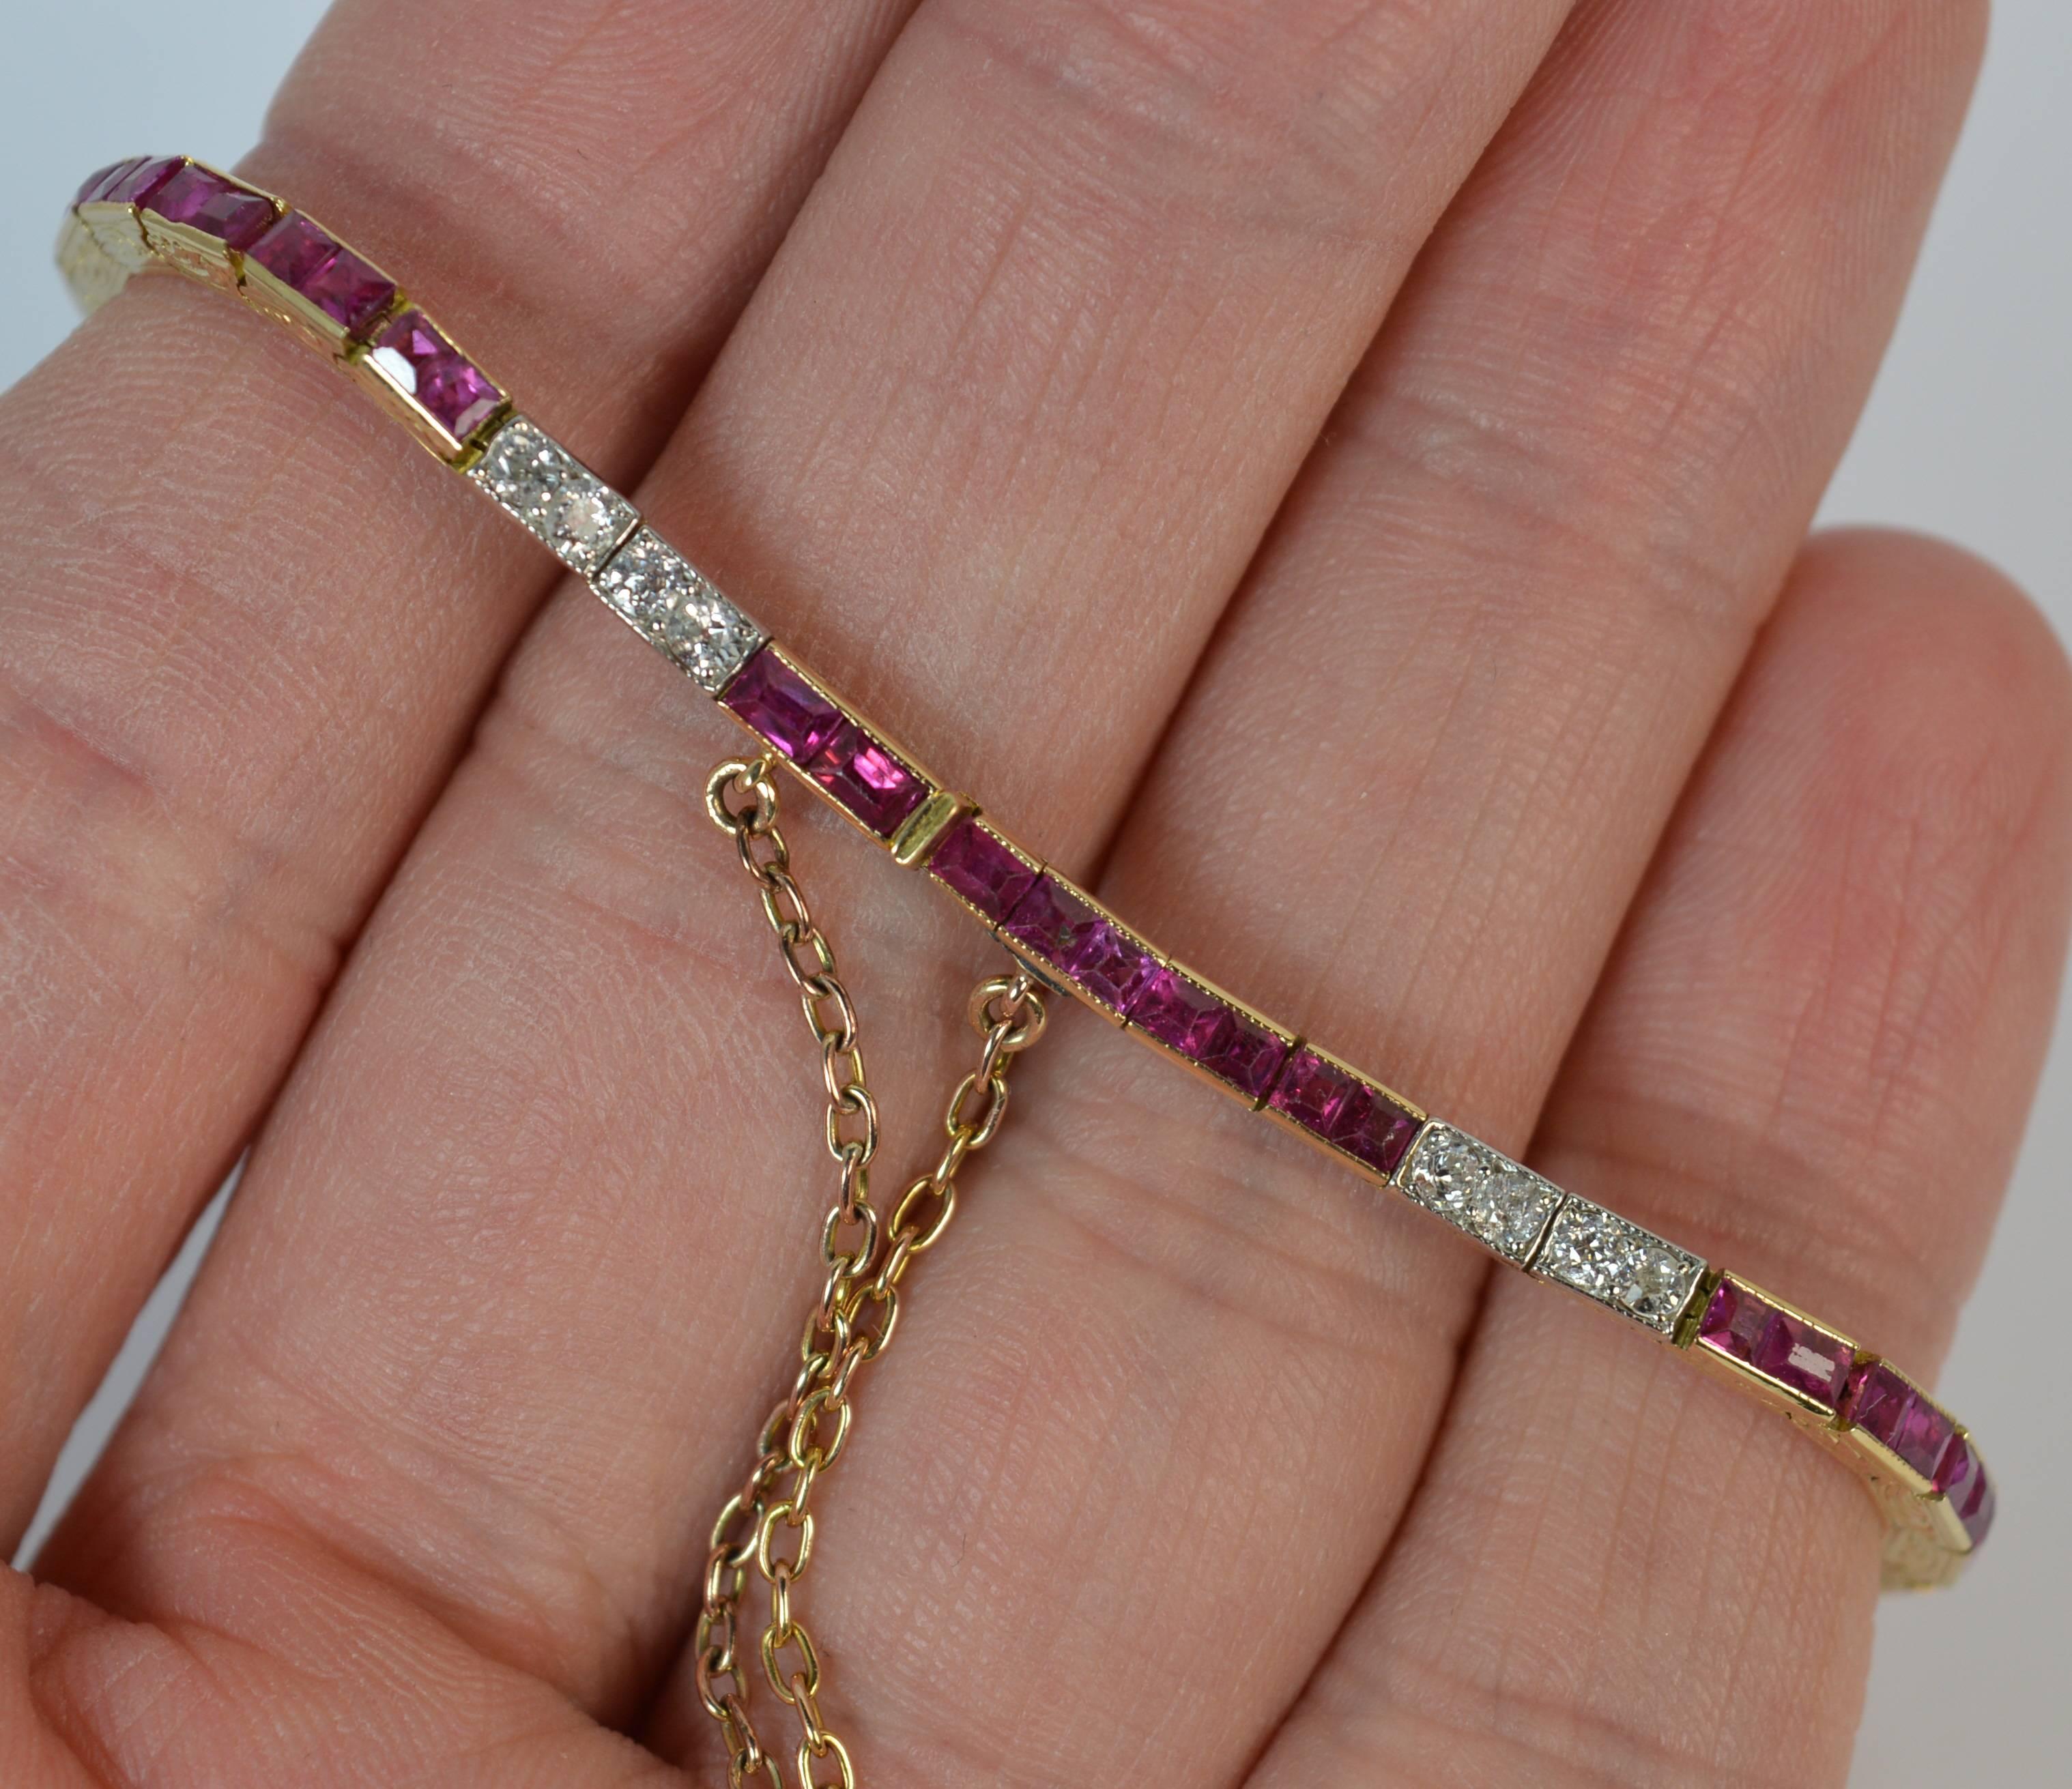 A stunning Art Deco period bracelet. Fantastically designed with four sections of four old cut diamonds and four sections of princess cut rubies. The diamonds mounted into platinum grain settings with the rubies and remainder of the bracelet in 18